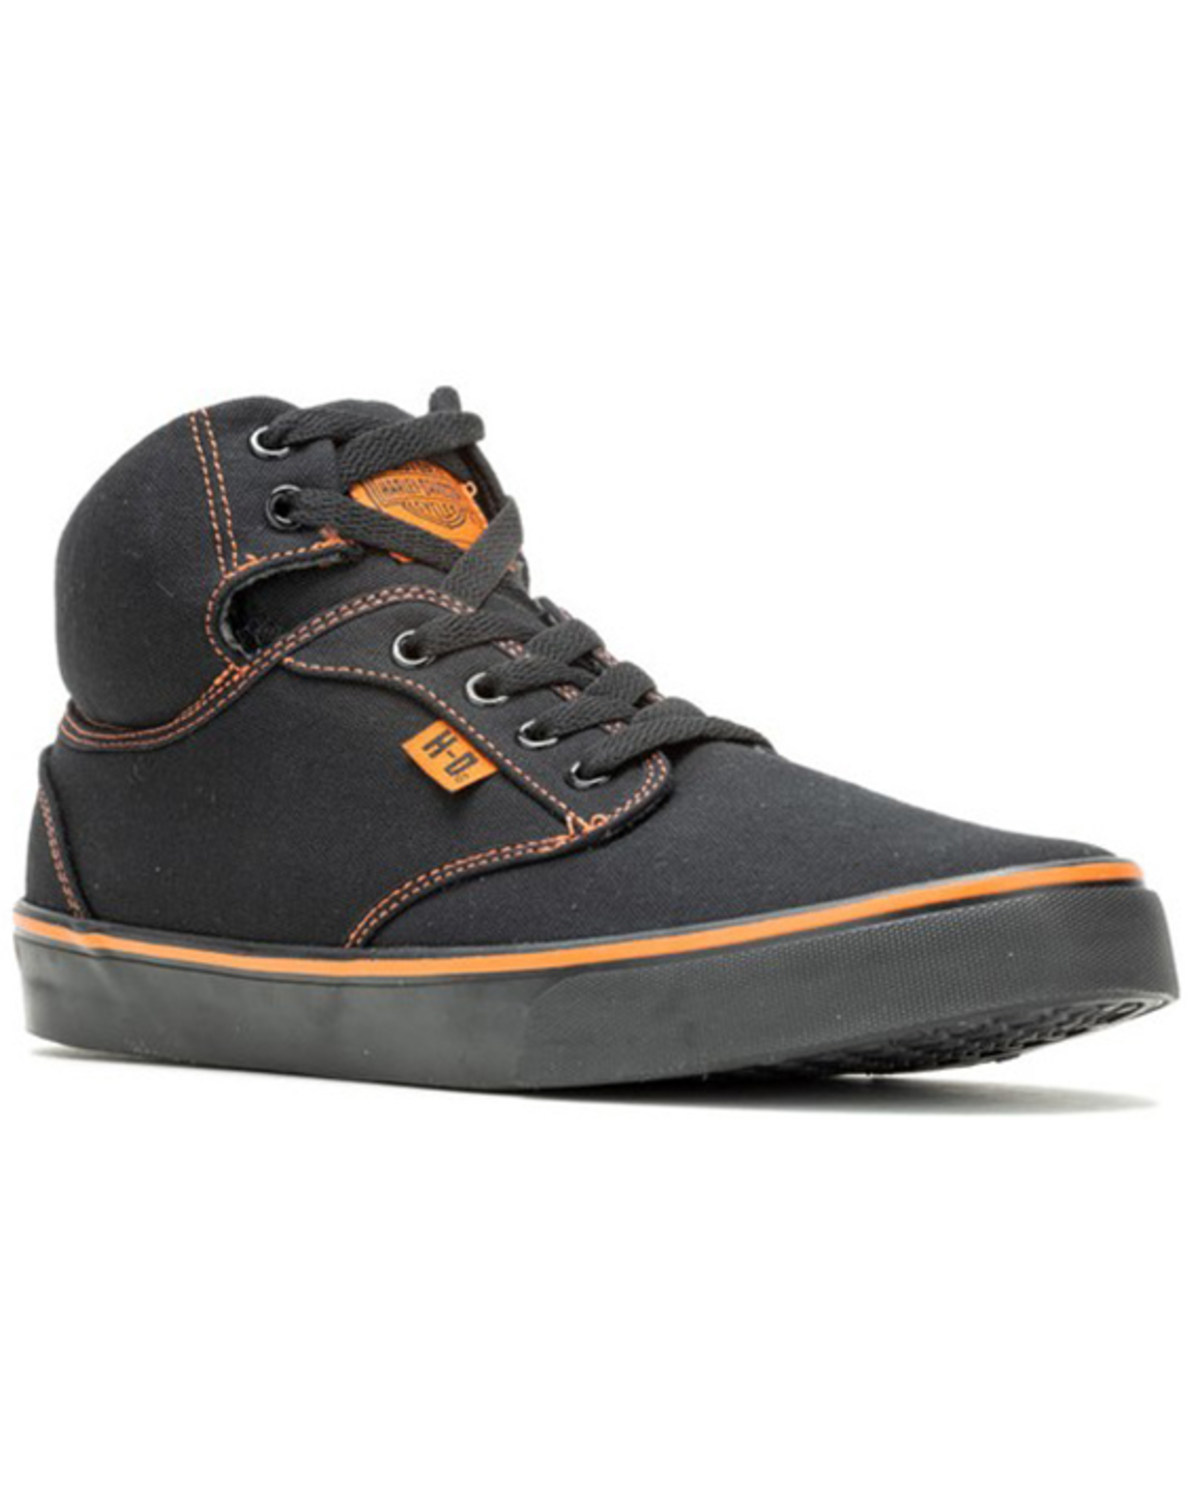 Harley Davidson Men's Wrenford Casual Shoes - Round Toe